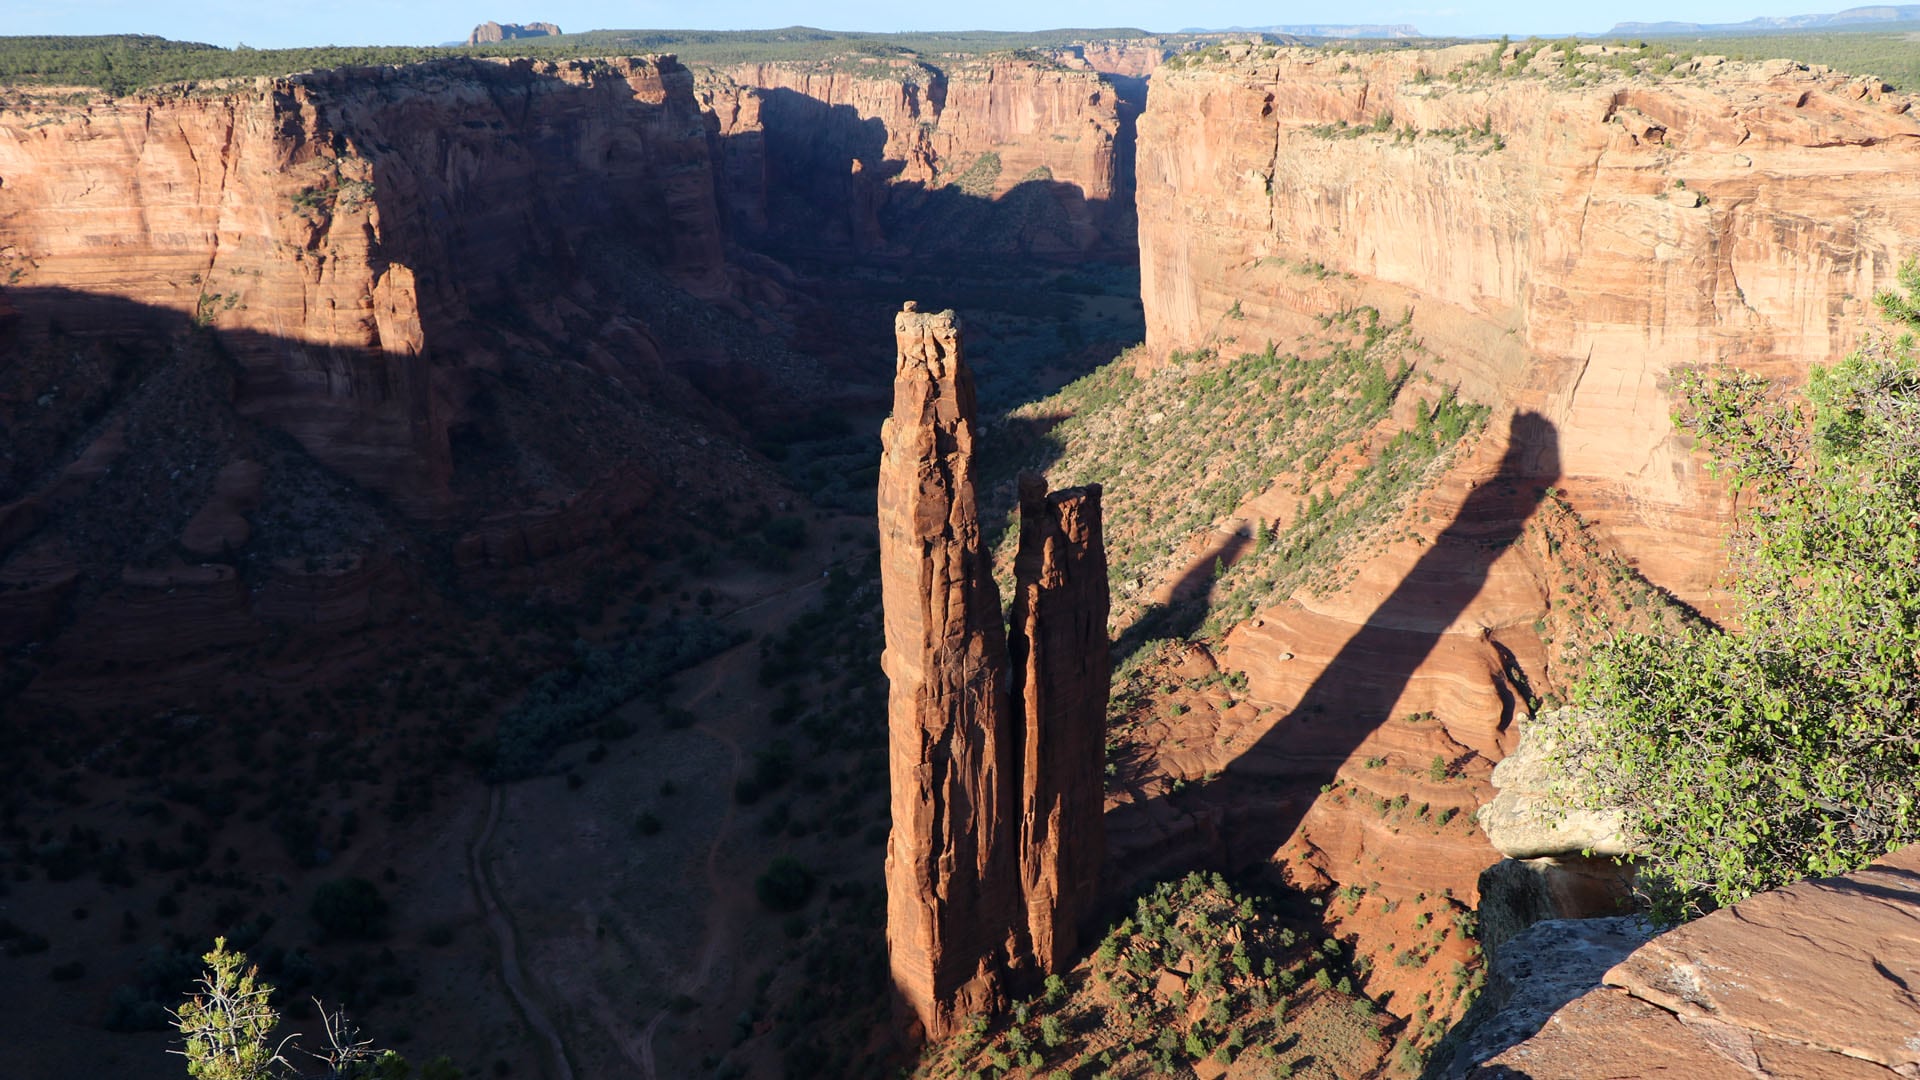 Spider Rock casts a long shadow as the sun sets on Canyon de Chelly.